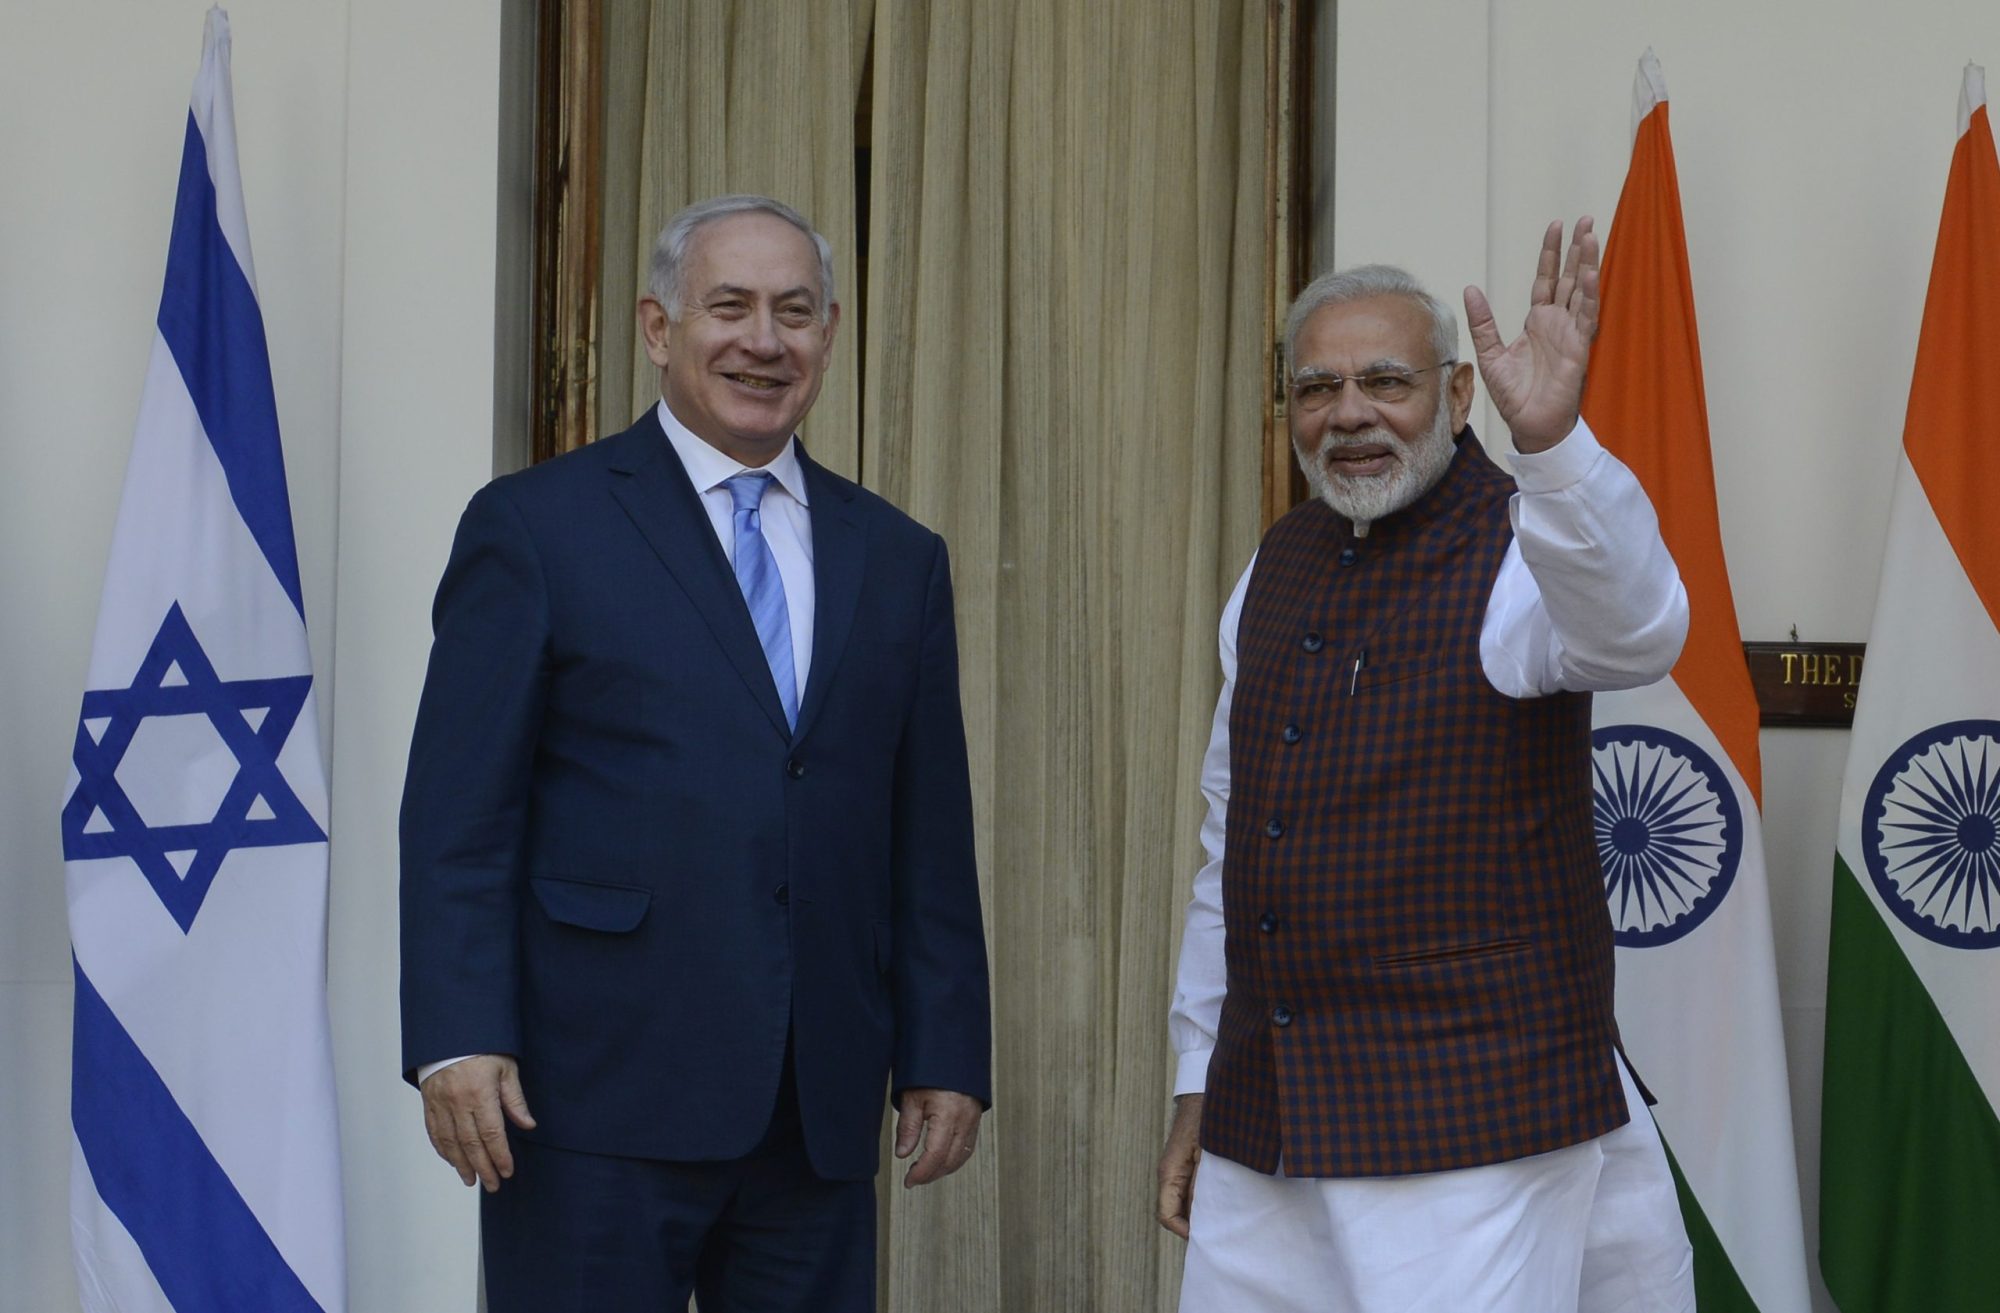 Prime Minister Narendra Modi with his Israeli counterpart Benjamin Netanyahu during a press conference at Hyderabad House in New Delhi. Photo by Pankaj Nangia/The India Today Group via Getty Images